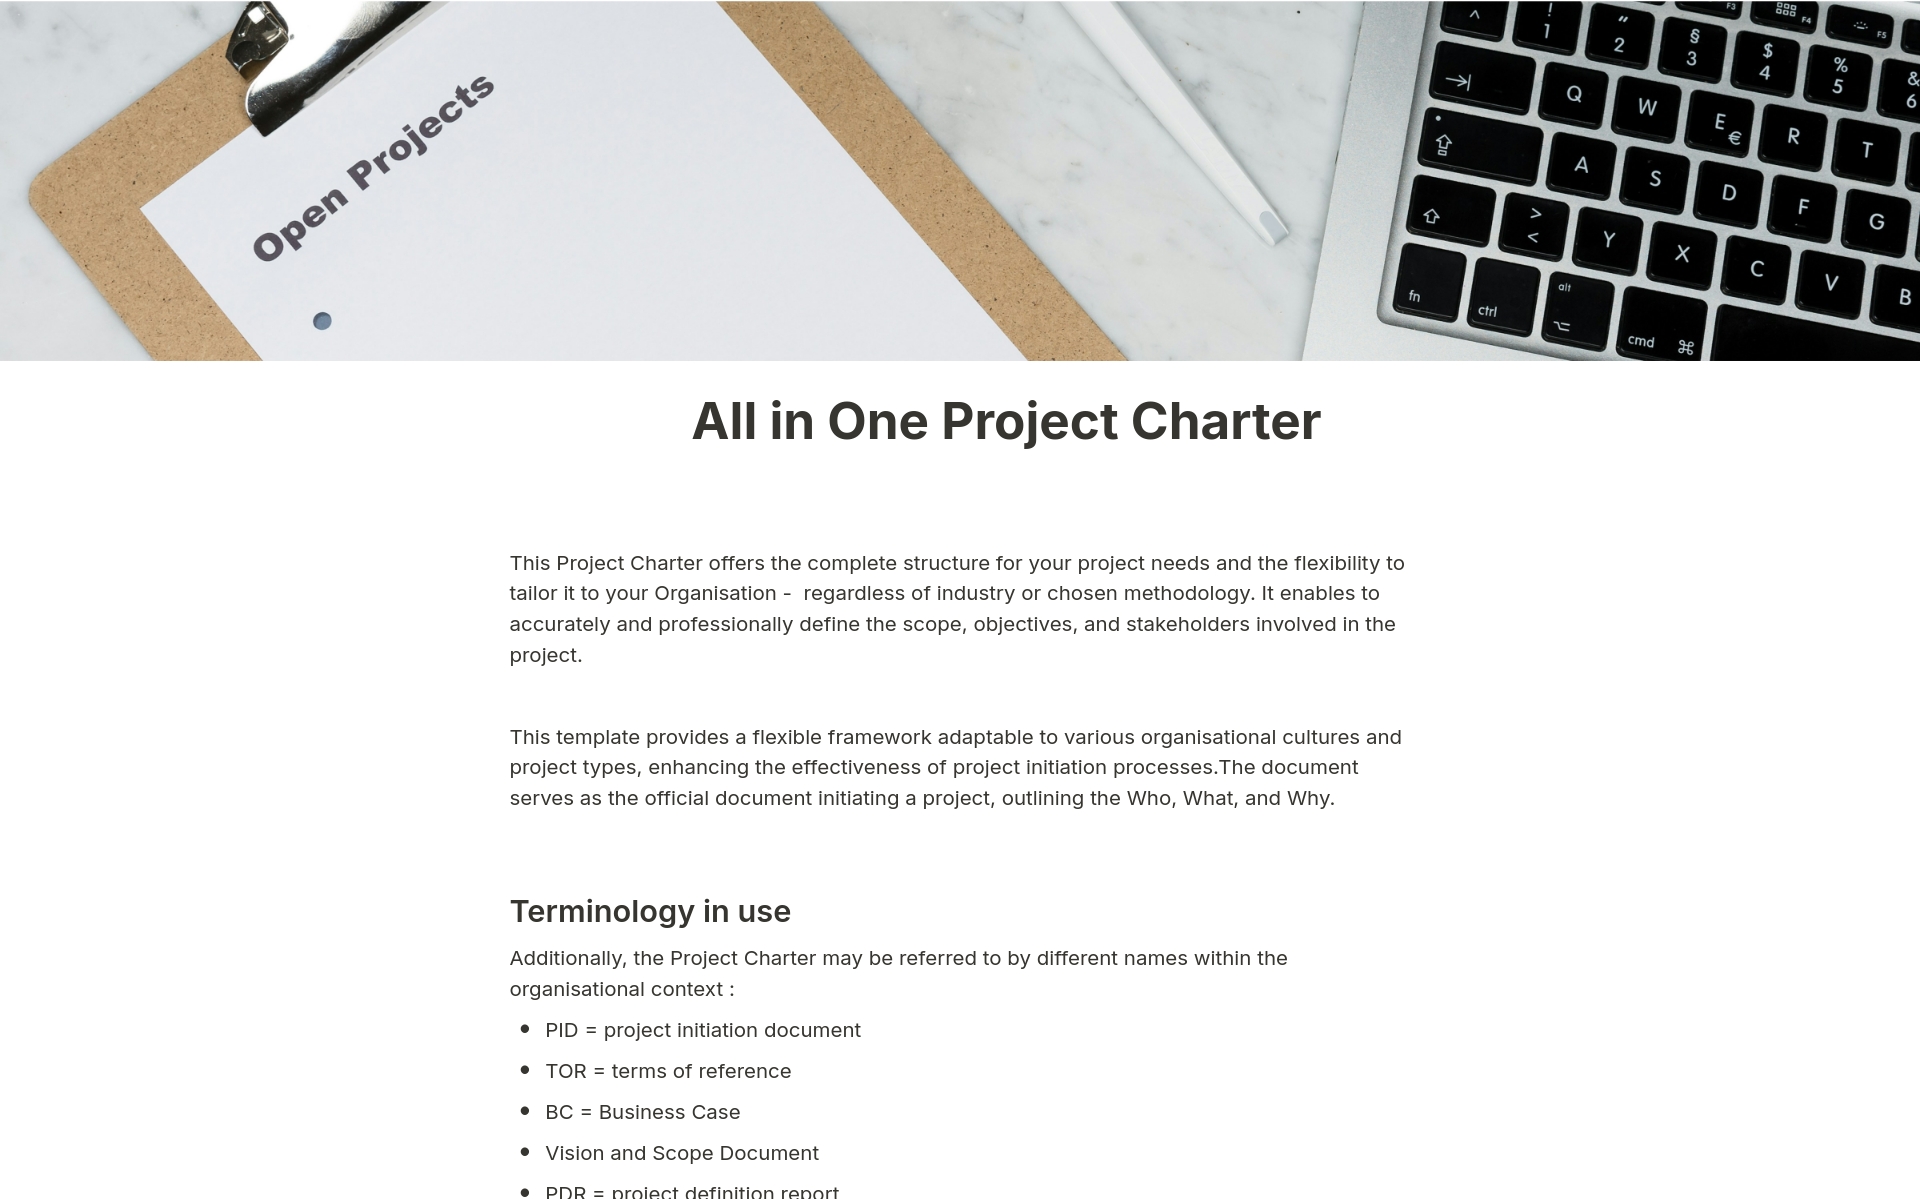 The All in One Project Charter becomes your Project Charter by selecting only the necessary components from its elements, being adaptable to your specific requirements. This model offers the professional structure of a project charter, that can be easily tailored.